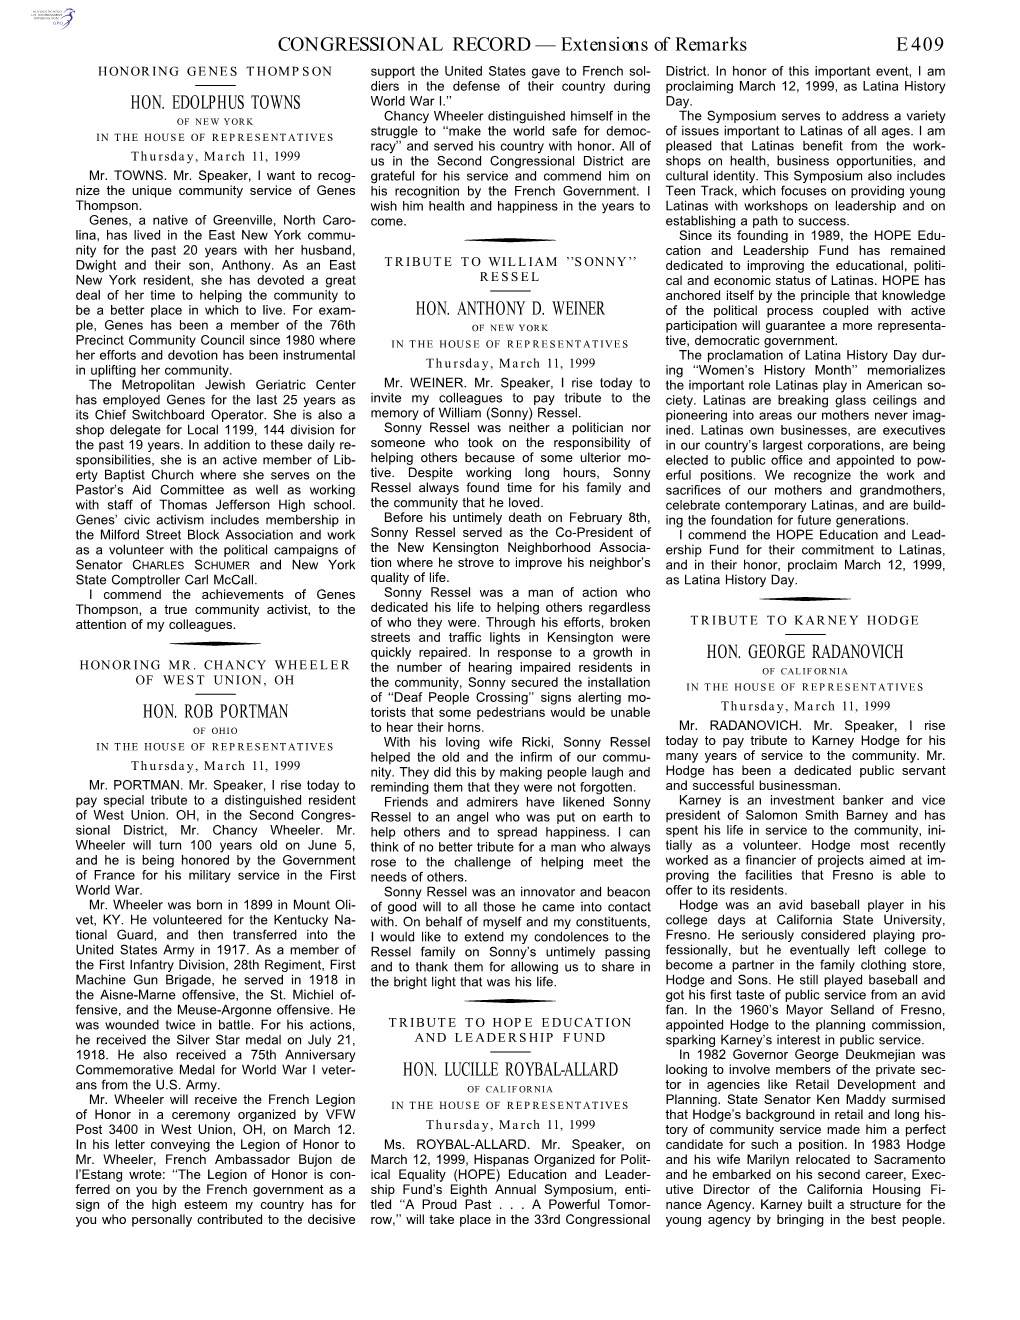 CONGRESSIONAL RECORD— Extensions of Remarks E409 HON